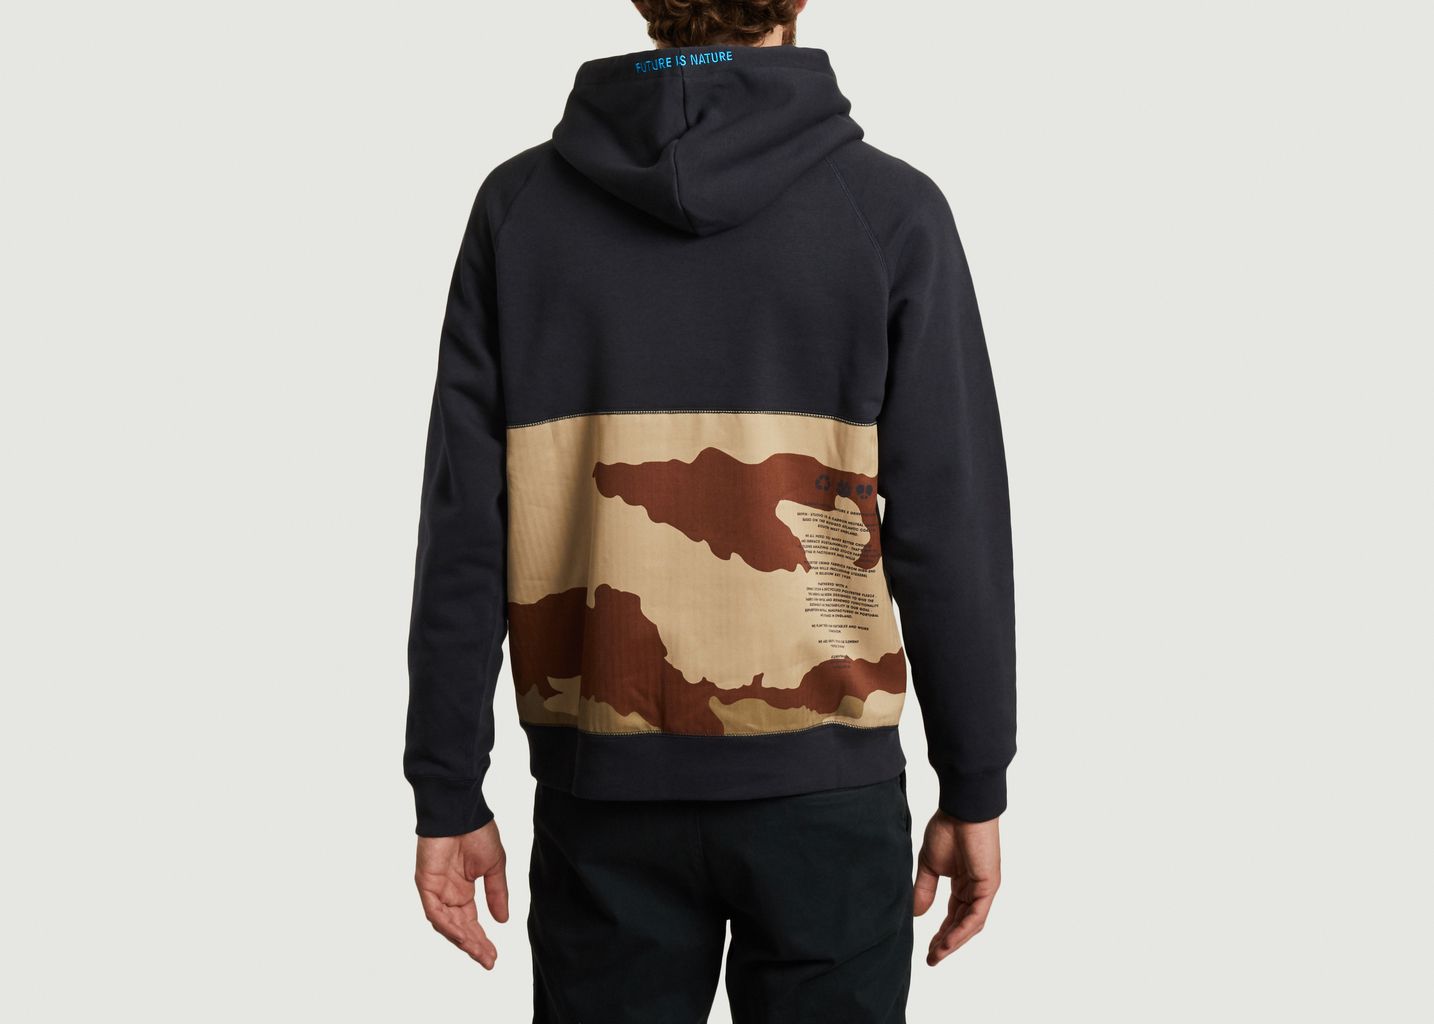 Griffin hoodie with patch and camo print back - Element